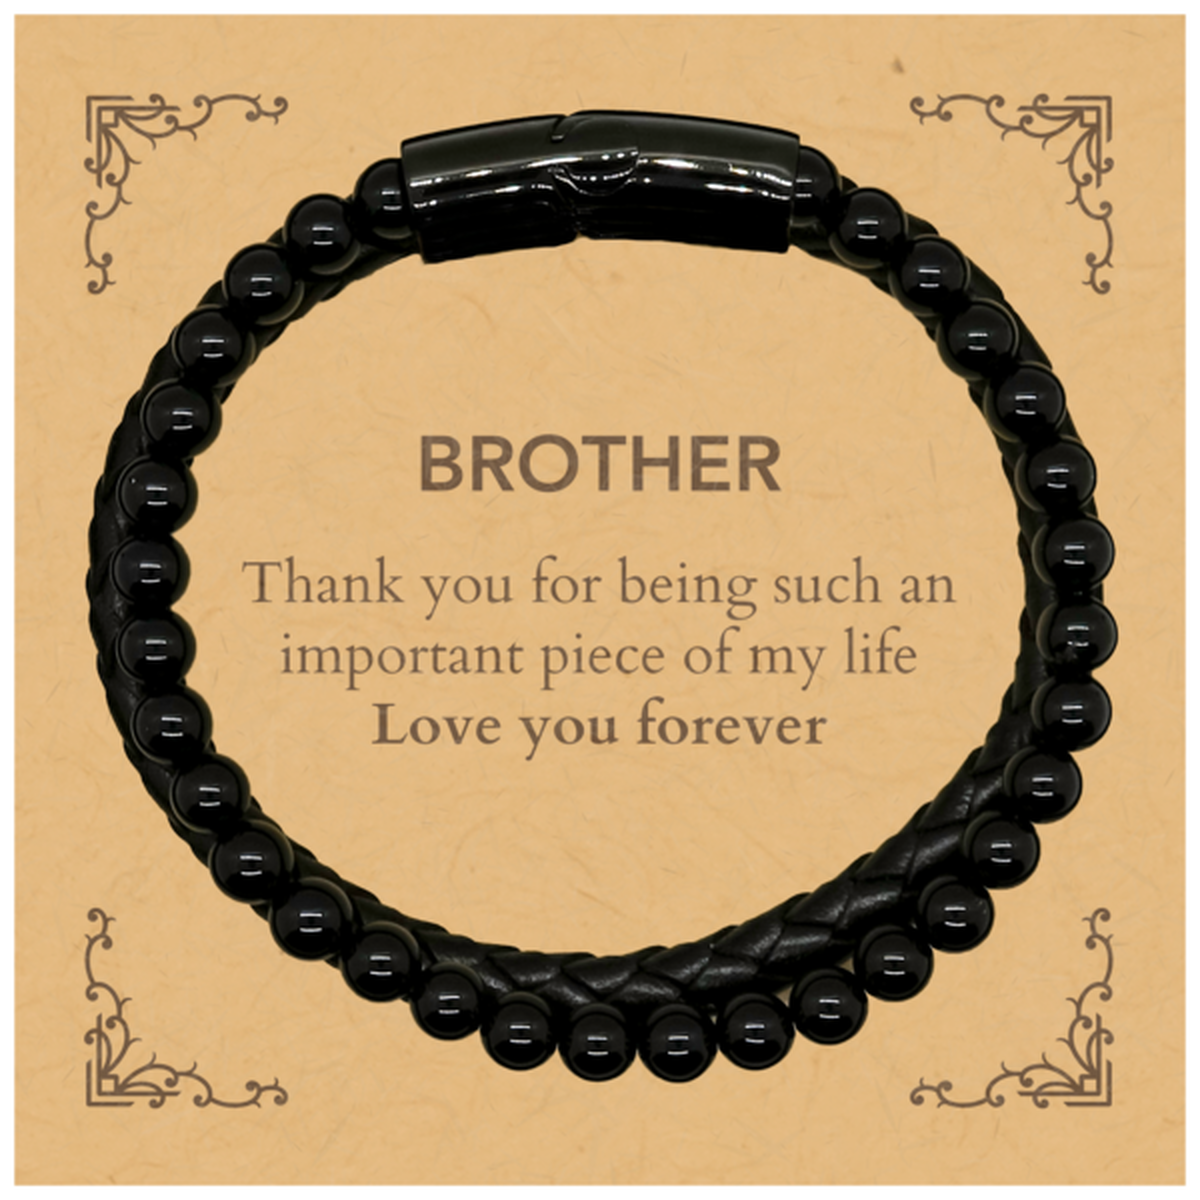 Appropriate Brother Stone Leather Bracelets Epic Birthday Gifts for Brother Thank you for being such an important piece of my life Brother Christmas Mothers Fathers Day